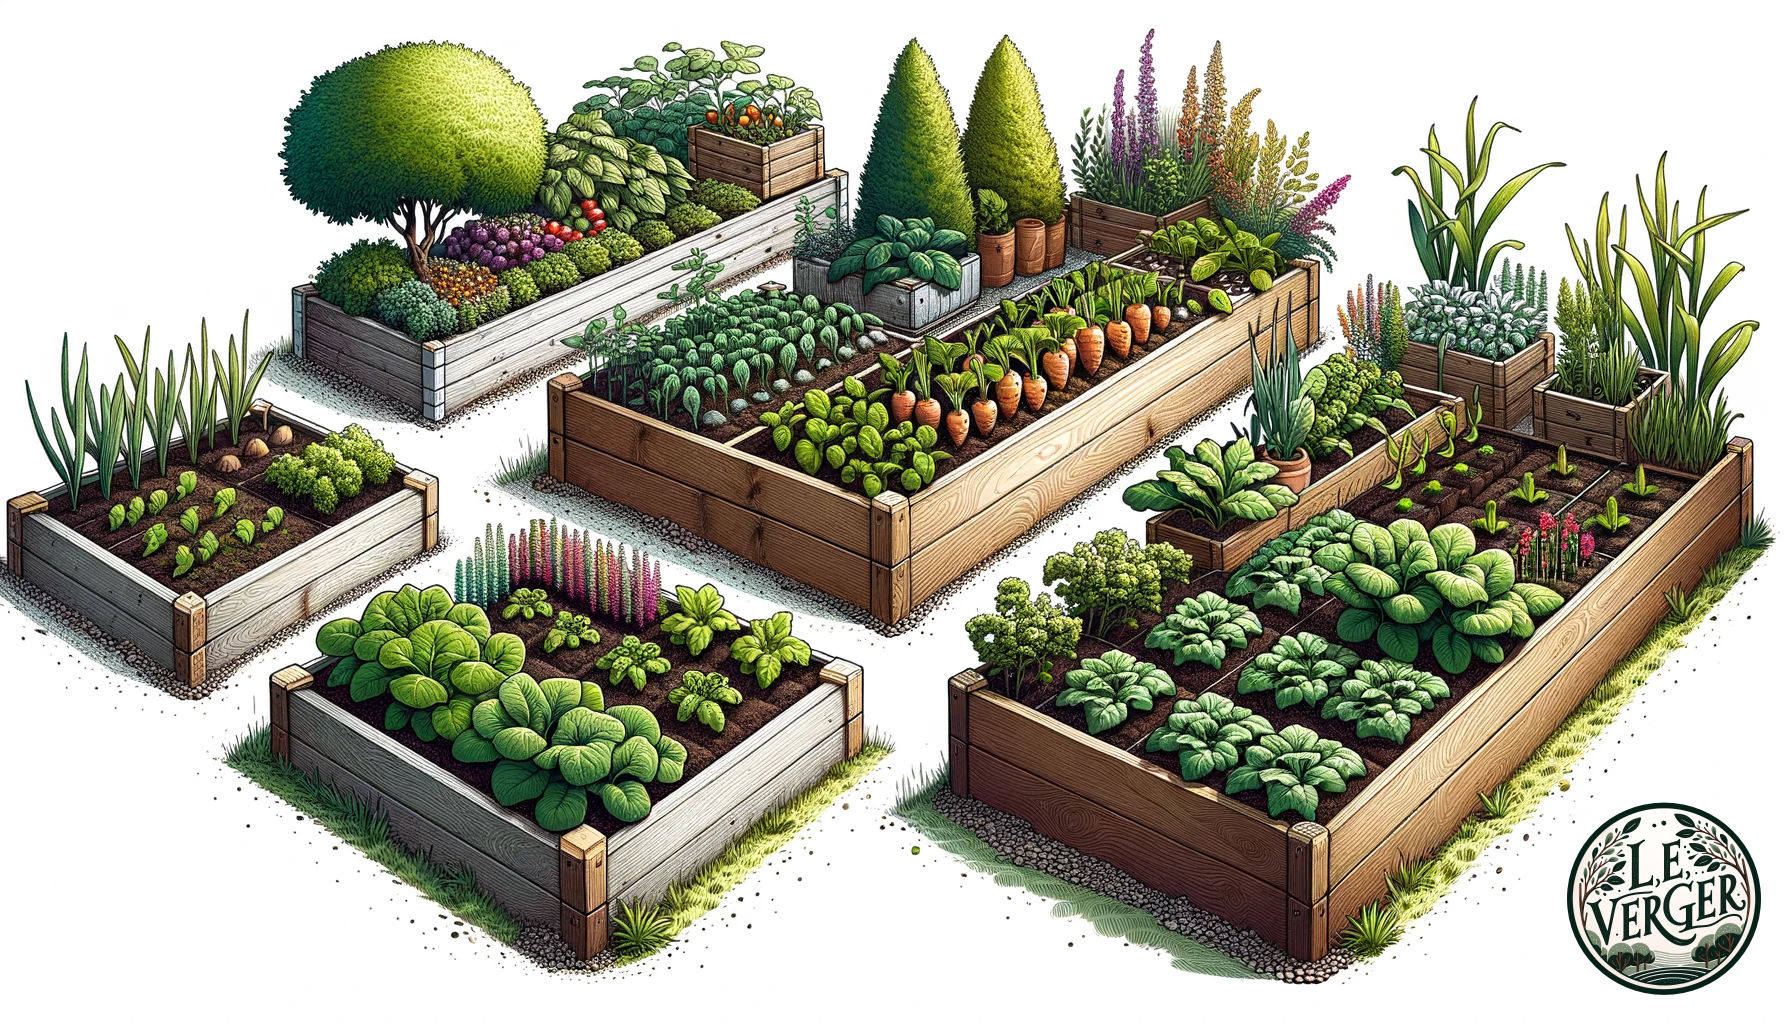 Illustration in wide aspect capturing the essence of raised bed gardening. The scene displays four raised beds, each constructed from a unique material: oak wood, metal, stone, and plastic. Every bed is a mini ecosystem, filled to the brim with soil and a diverse range of plants, from leafy shrubs to colourful vegetables, all thriving under the gentle sun.